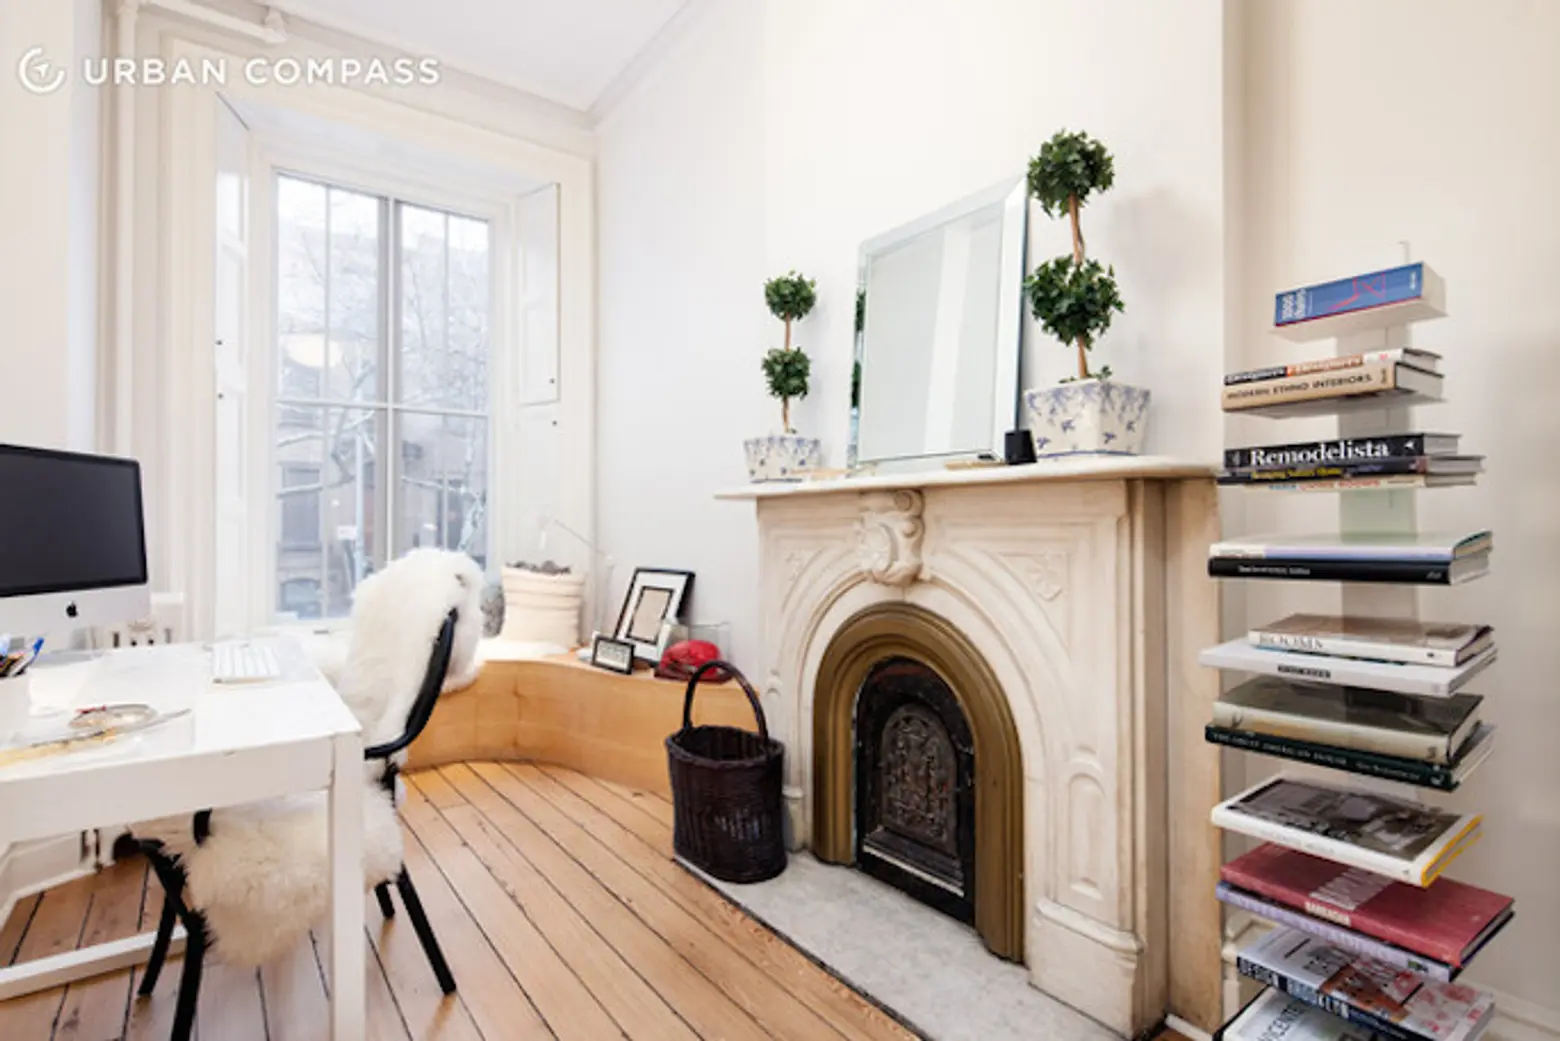 241 Sacket Street, landscaped garden with playhouse, renovated townhouse with green bathroom